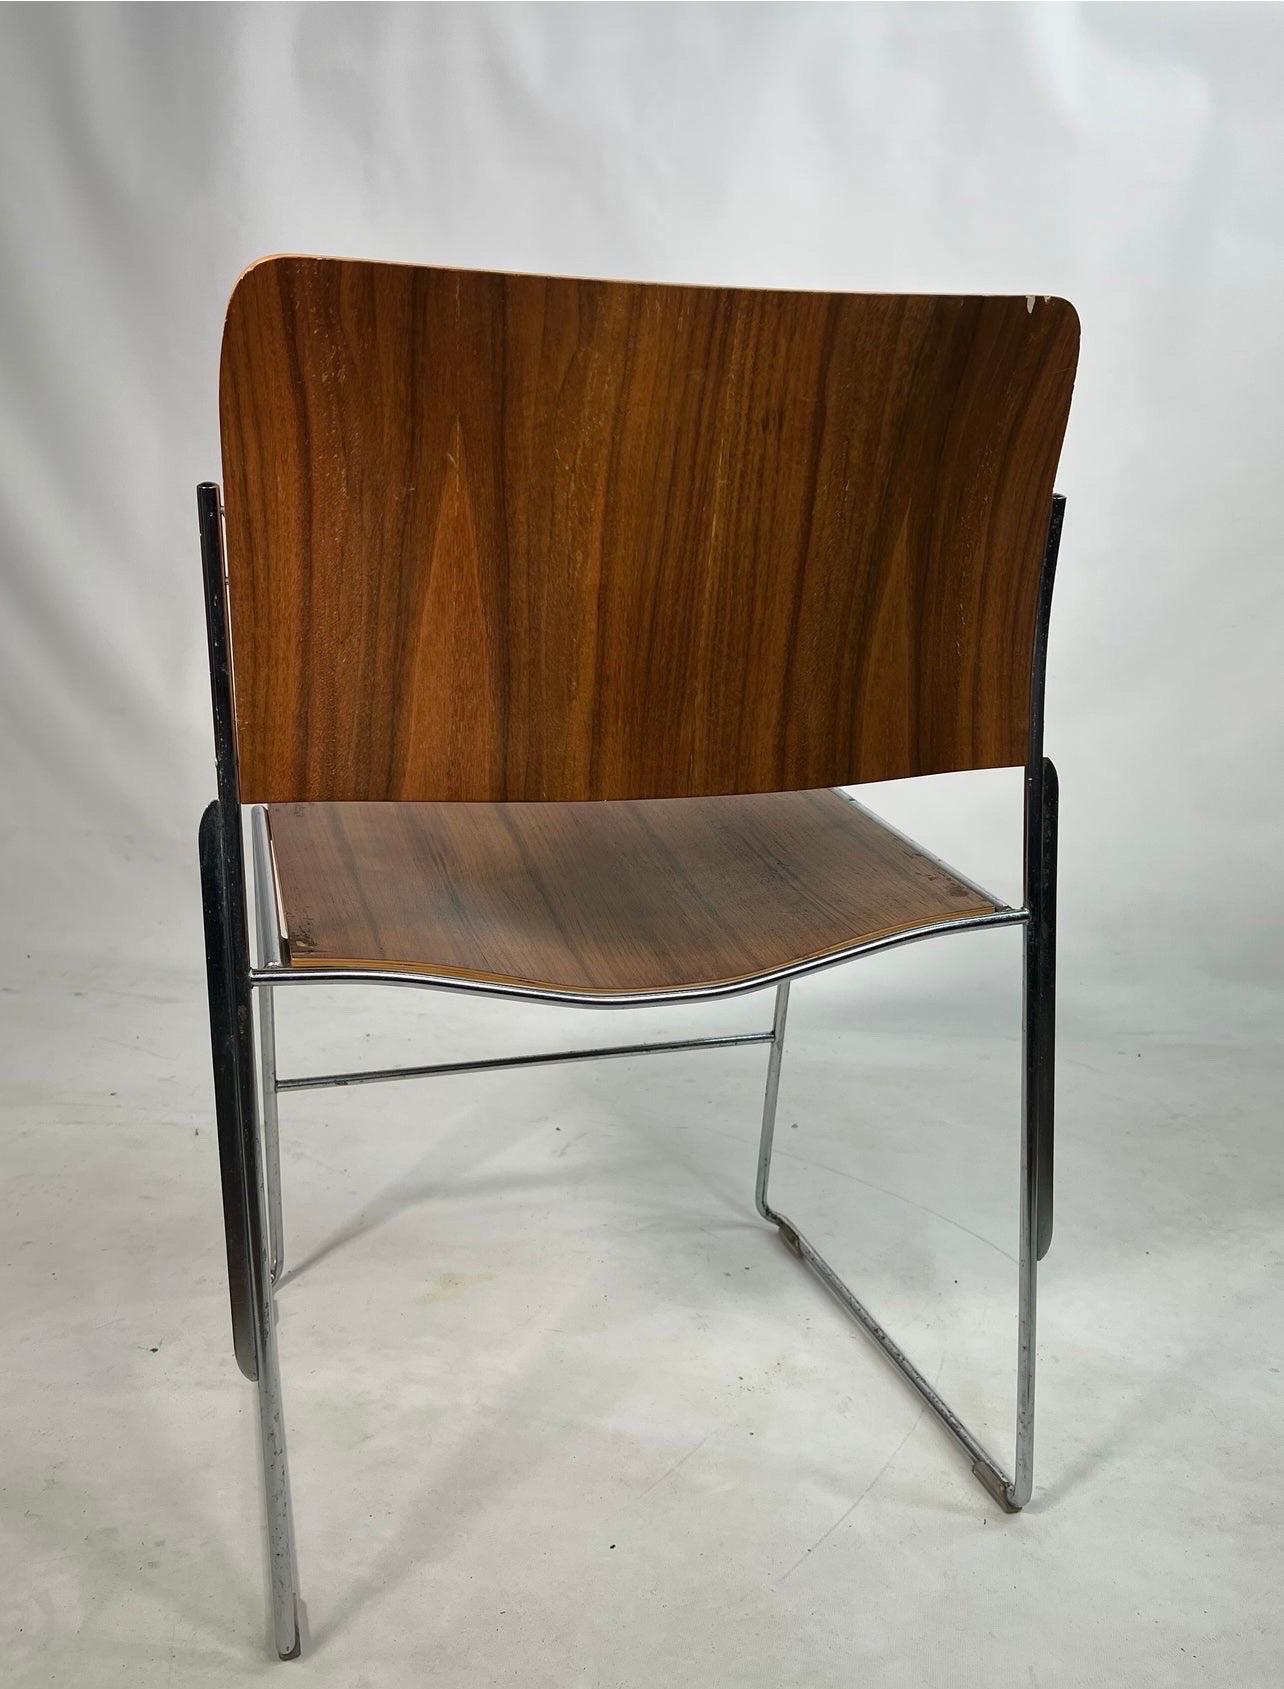 David Rowland Bentwood Stackable dining chair. The chair was made in 1973 with bent plywood and a steel frame. I currently have 7 chairs available.